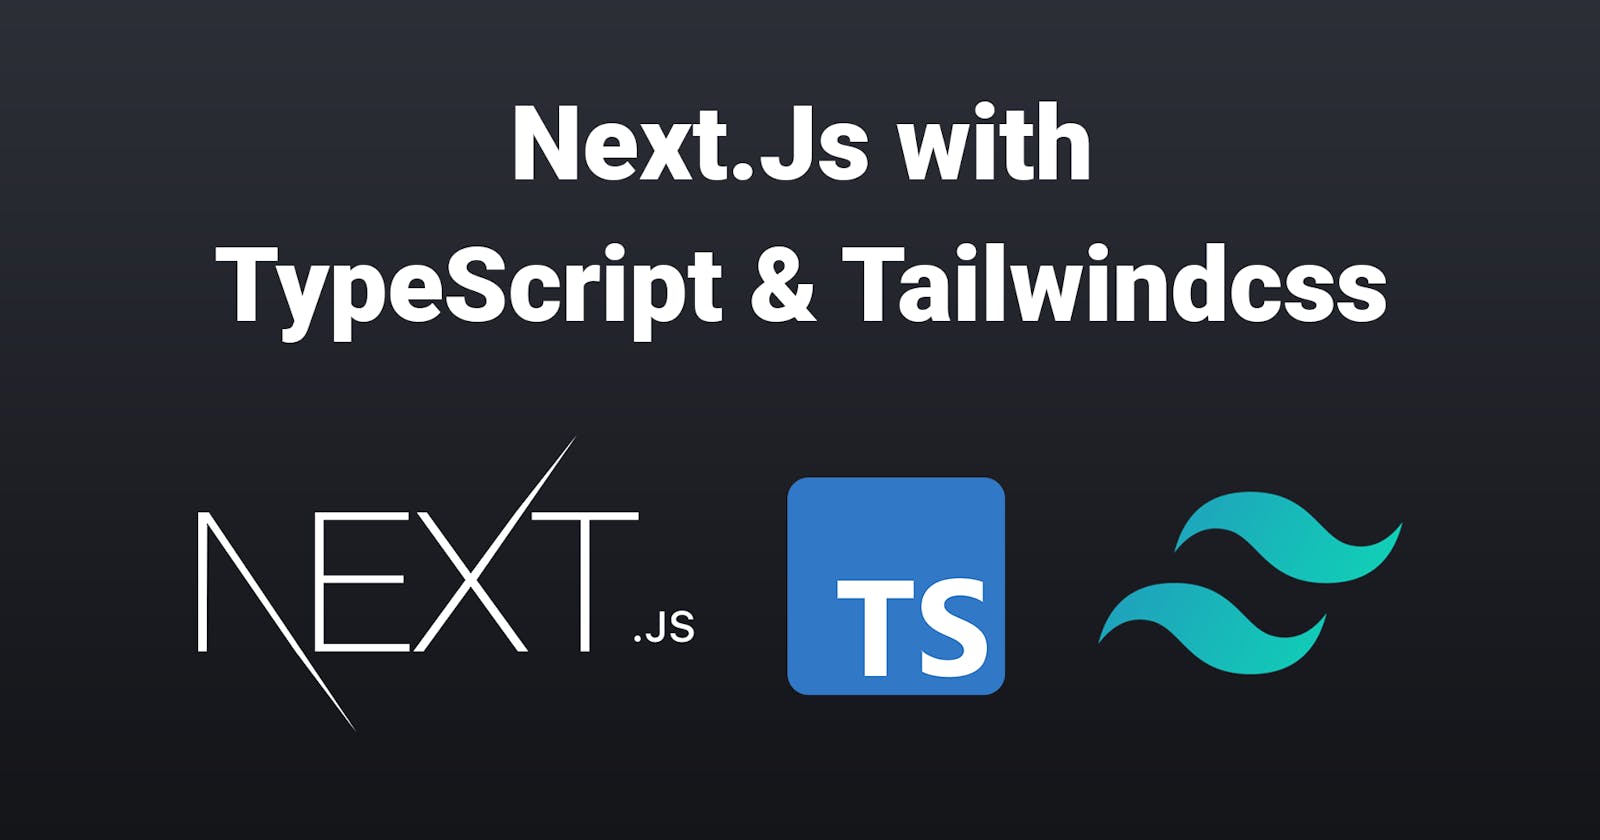 Create a Next.js project with TypeScript and Tailwindcss (JIT) from scratch!